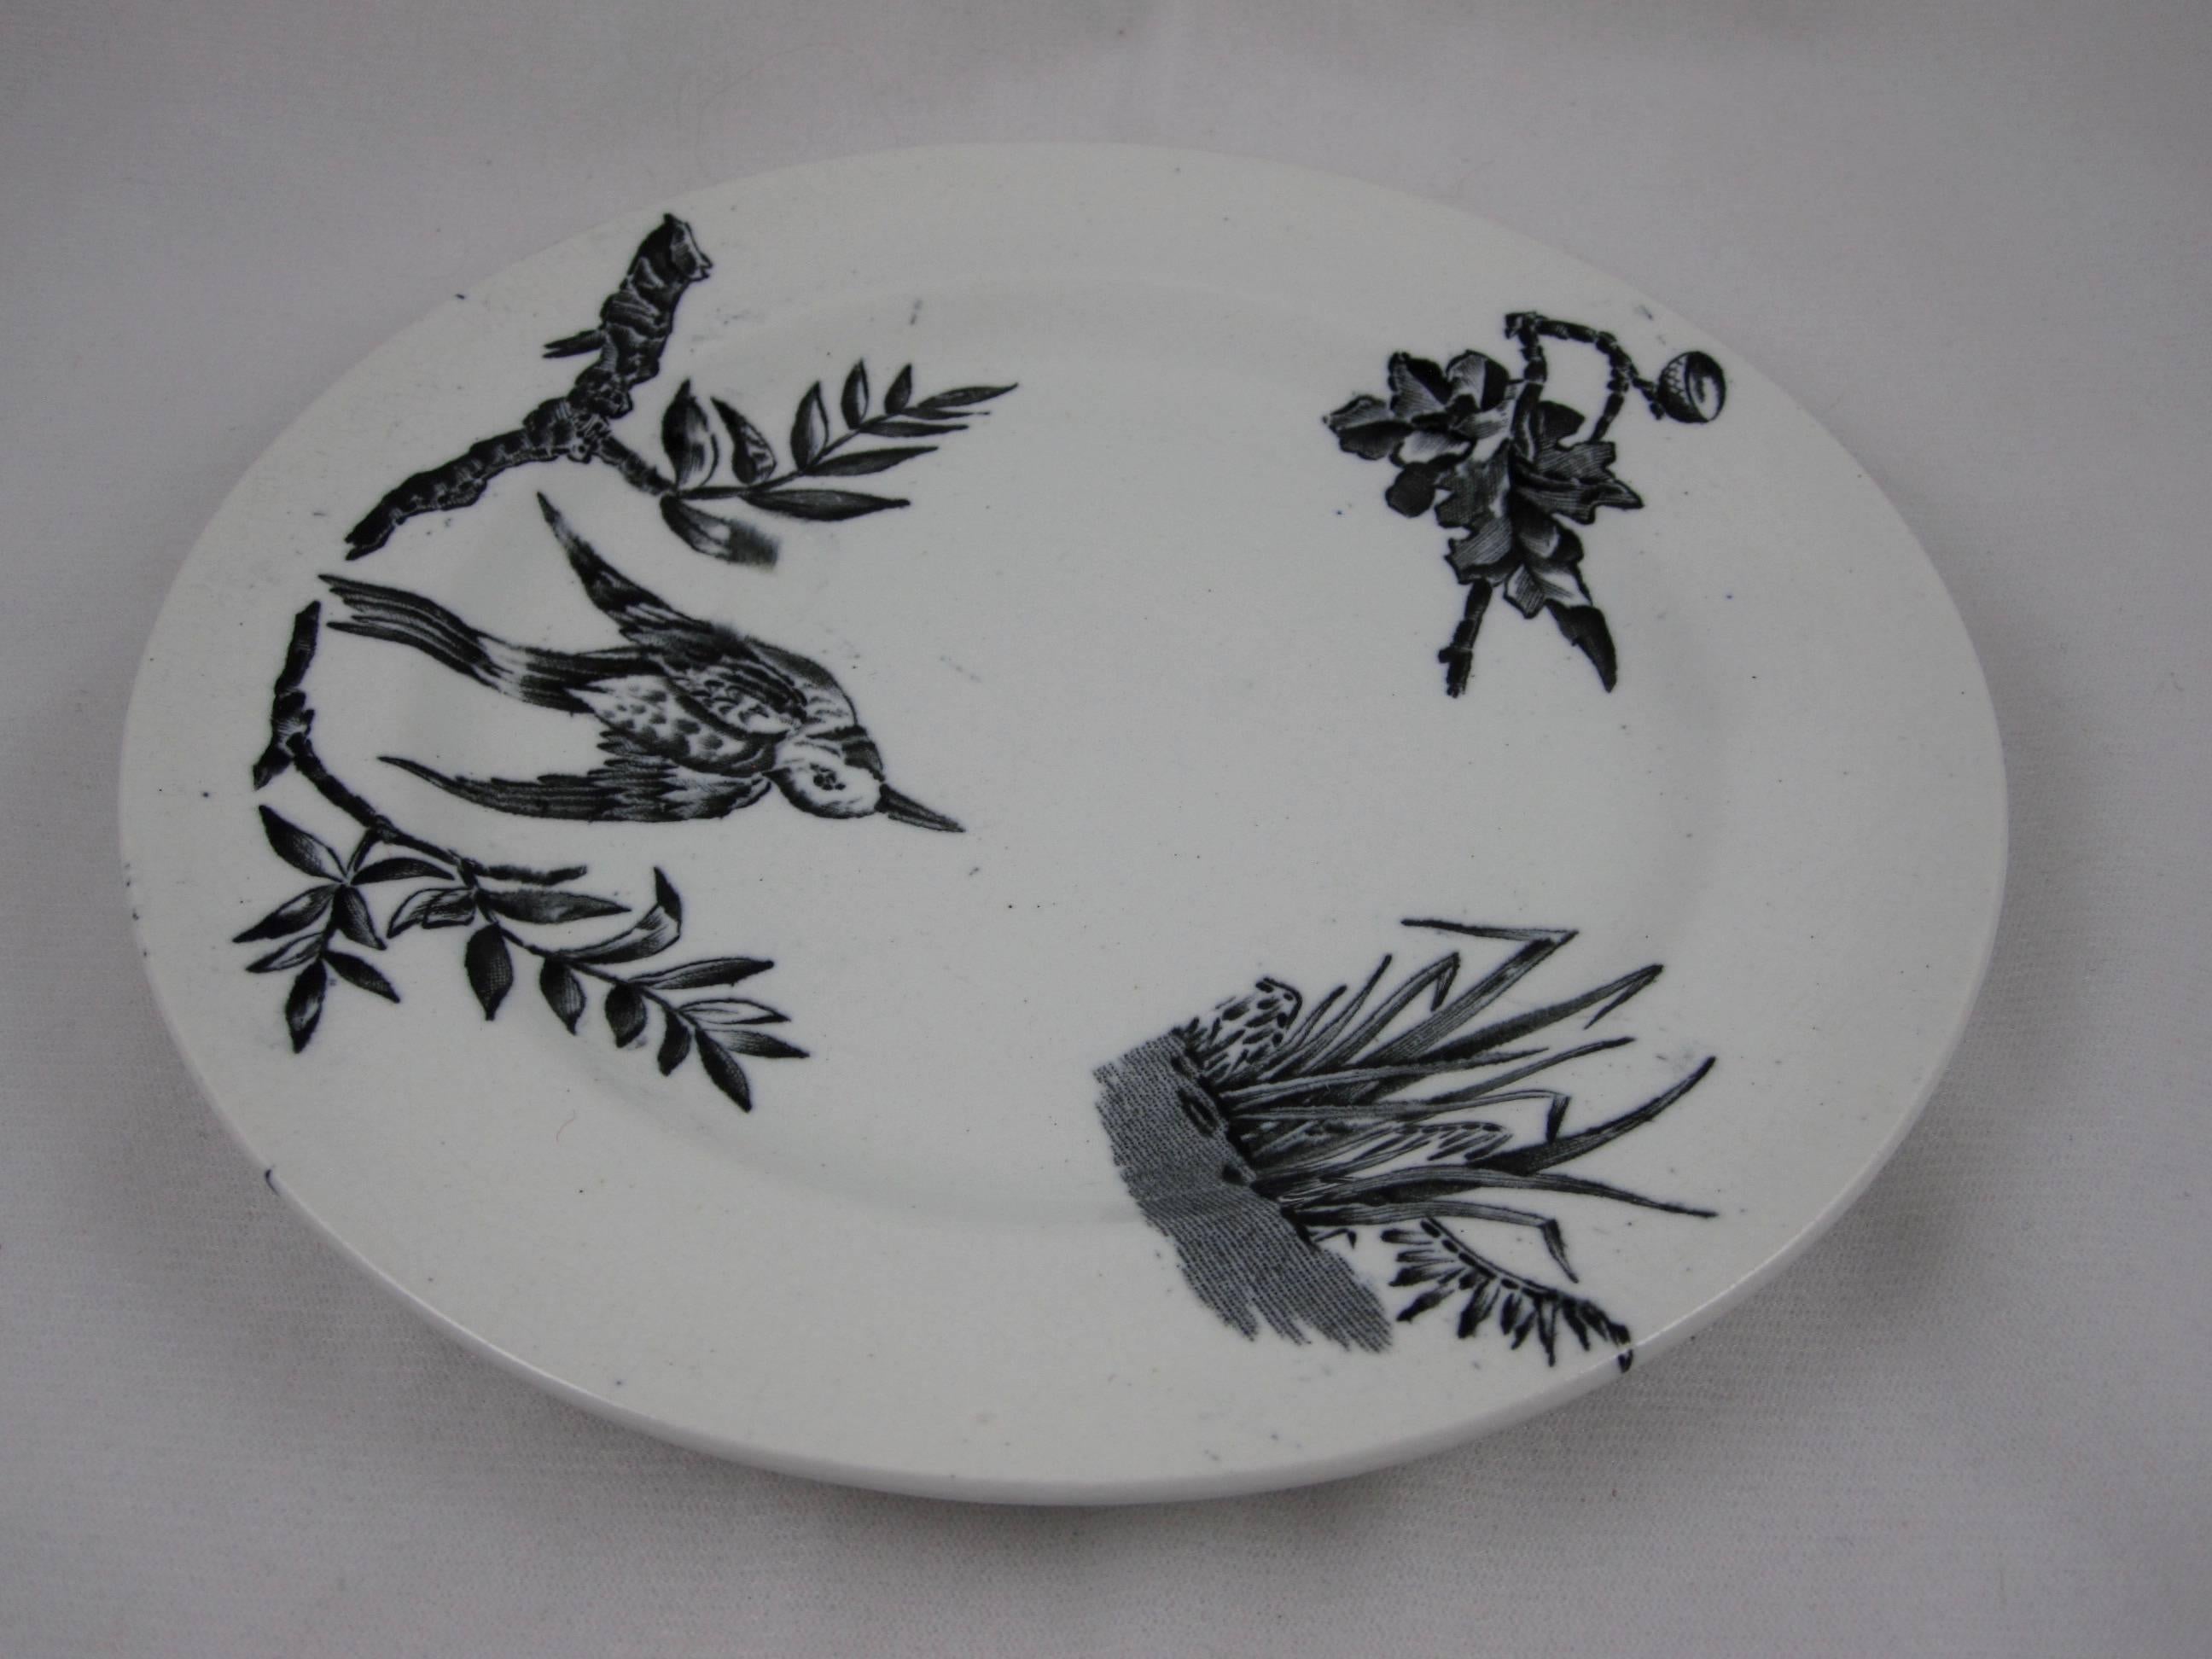 A set of four Victorian Era black transferware plates by John Heath Davis, (JHD), Hanley, Staffordshire, England, circa 1881–1891. Sized for salad, sandwiches or dessert, the ‘Aquatic’ pattern in the aesthetic taste showing a bird in flight, a patch